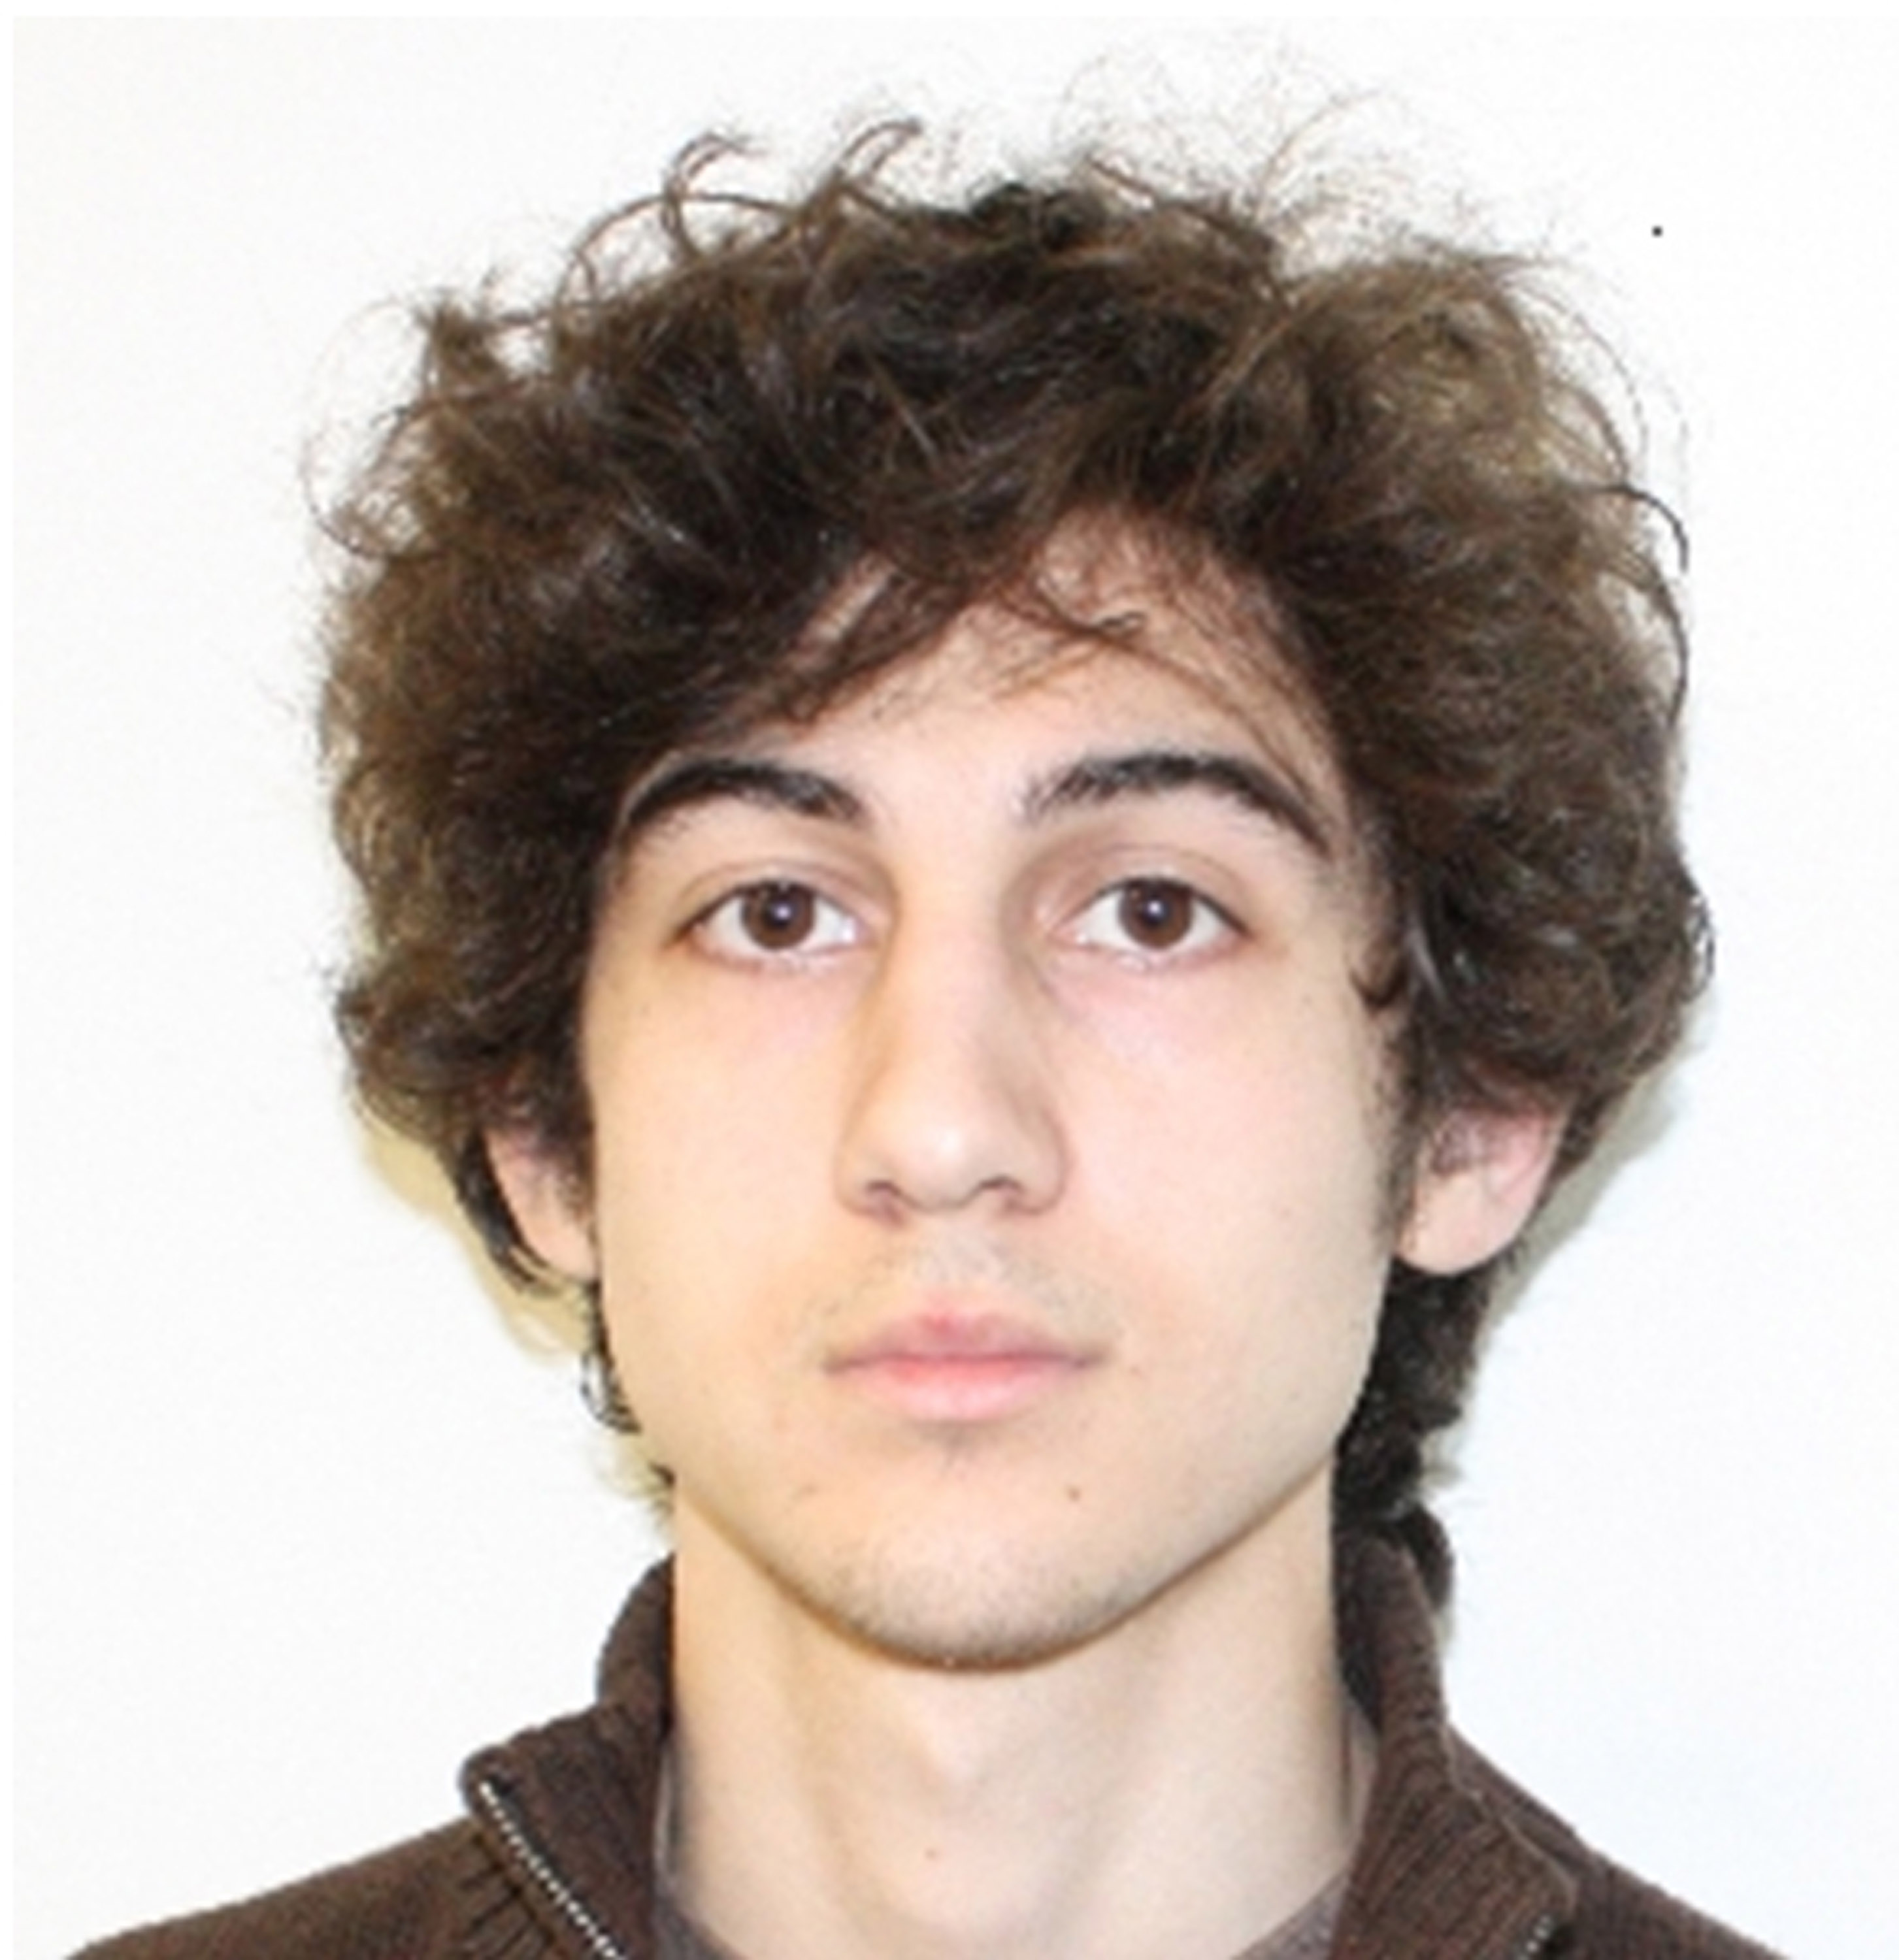 Dzhokhar Tsarnaev, 19-years-old, a suspect in the Boston Marathon bombing is seen in this April 19, 2013 handout image. (FBI/Getty Images)